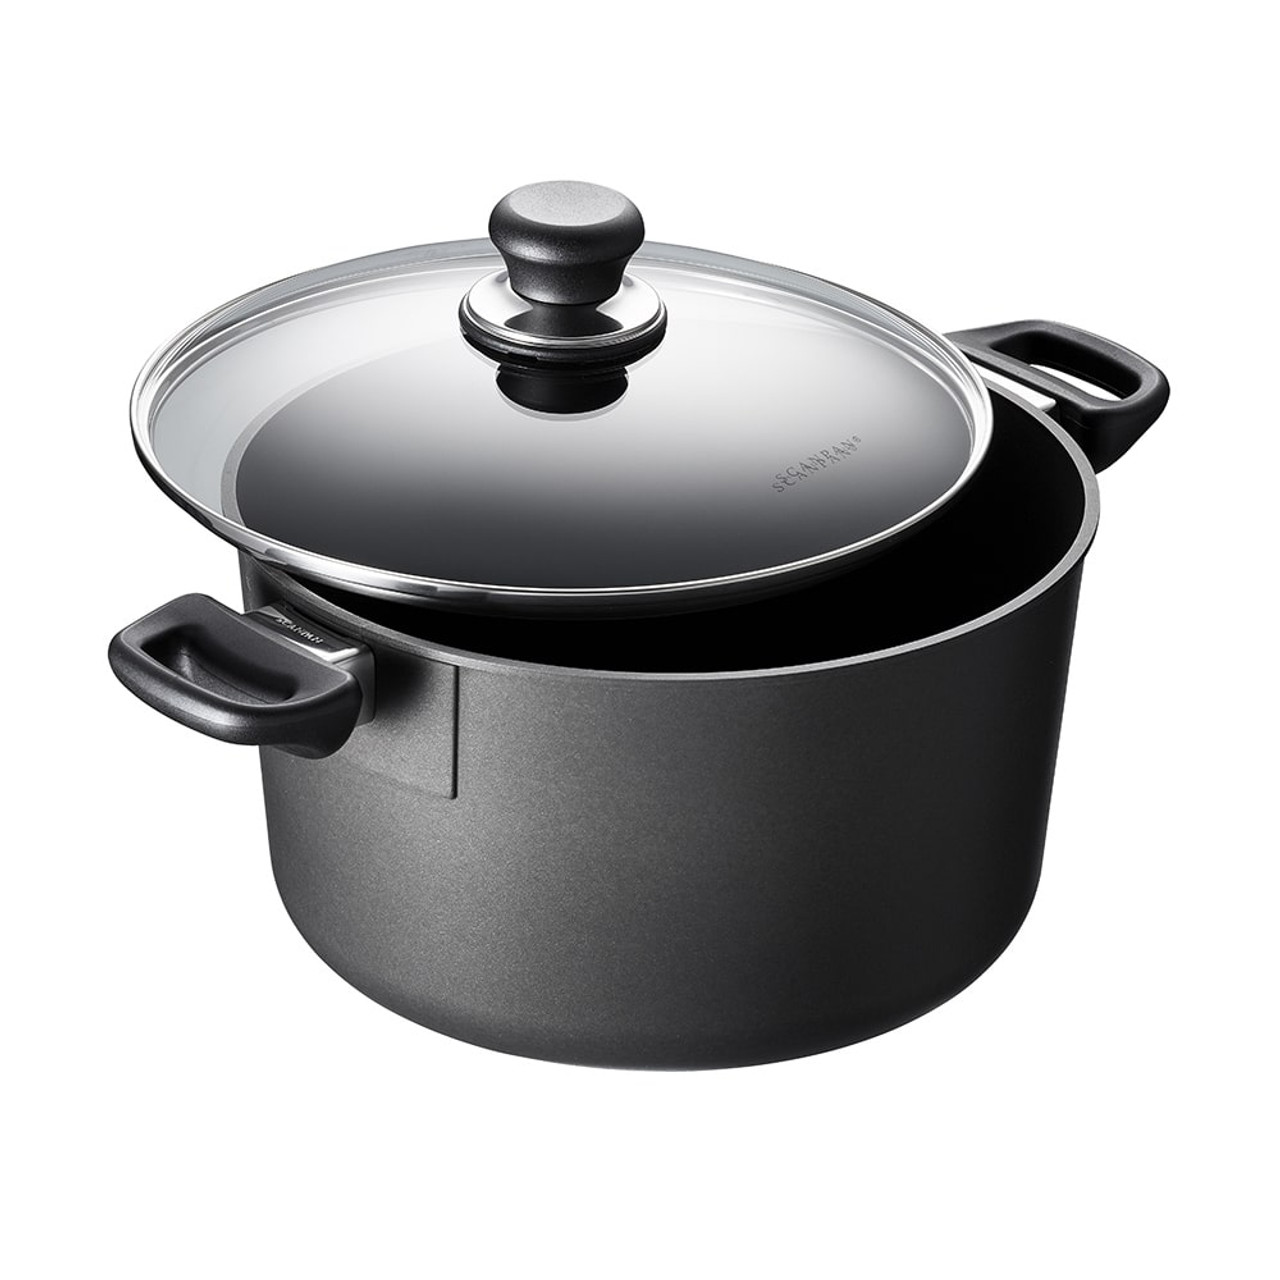 https://cdn11.bigcommerce.com/s-hccytny0od/images/stencil/1280x1280/products/3125/11071/scanpan-classic-induction-dutch-oven-1__54795.1578041741.jpg?c=2?imbypass=on